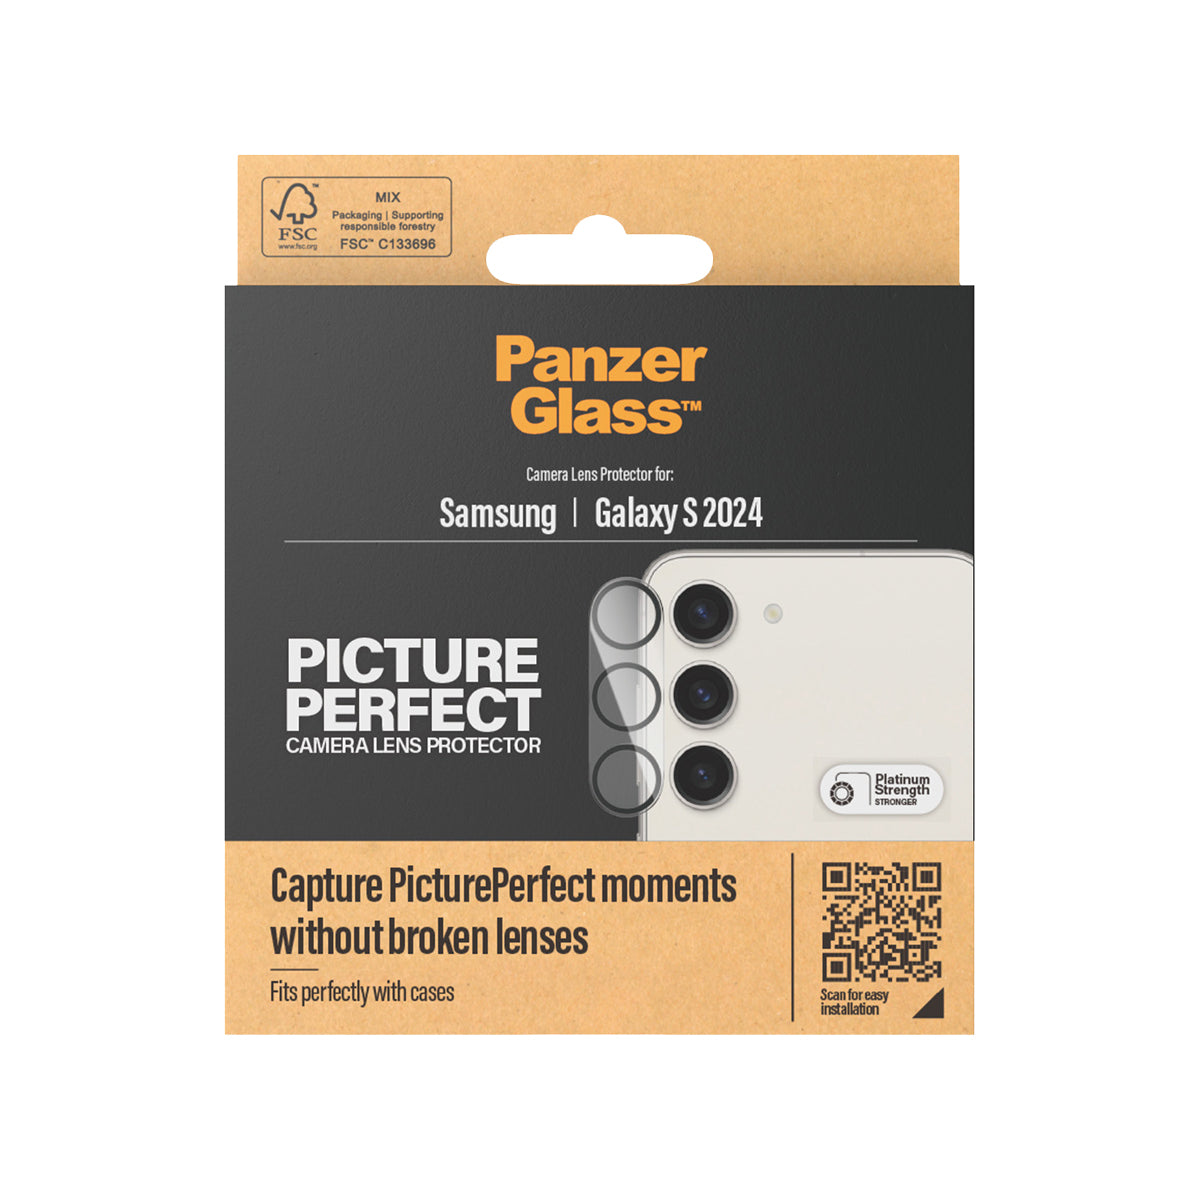 PanzerGlass PicturePerfect Camera Lens Protector for Samsung Galaxy S24 | S23 | S23+